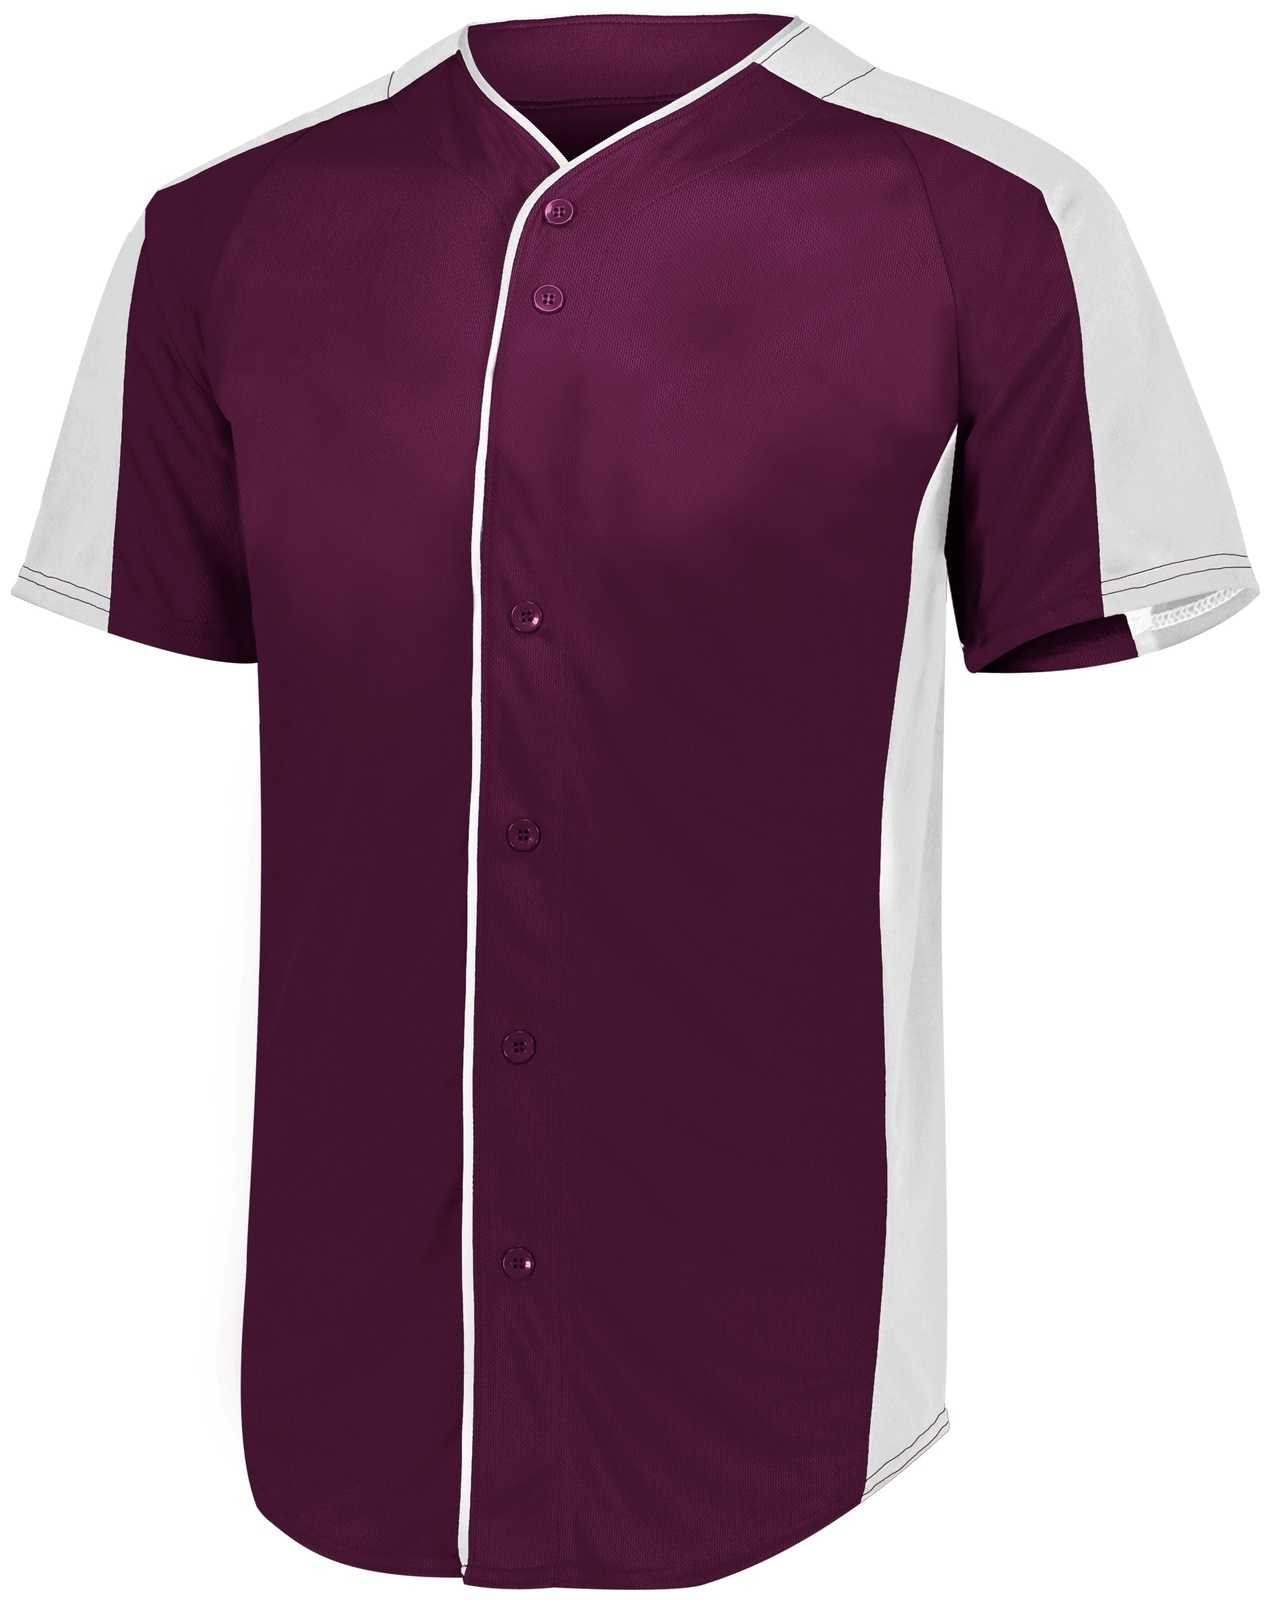 Augusta 1656 Youth Full-Button Baseball Jersey - Maroon White - HIT a Double